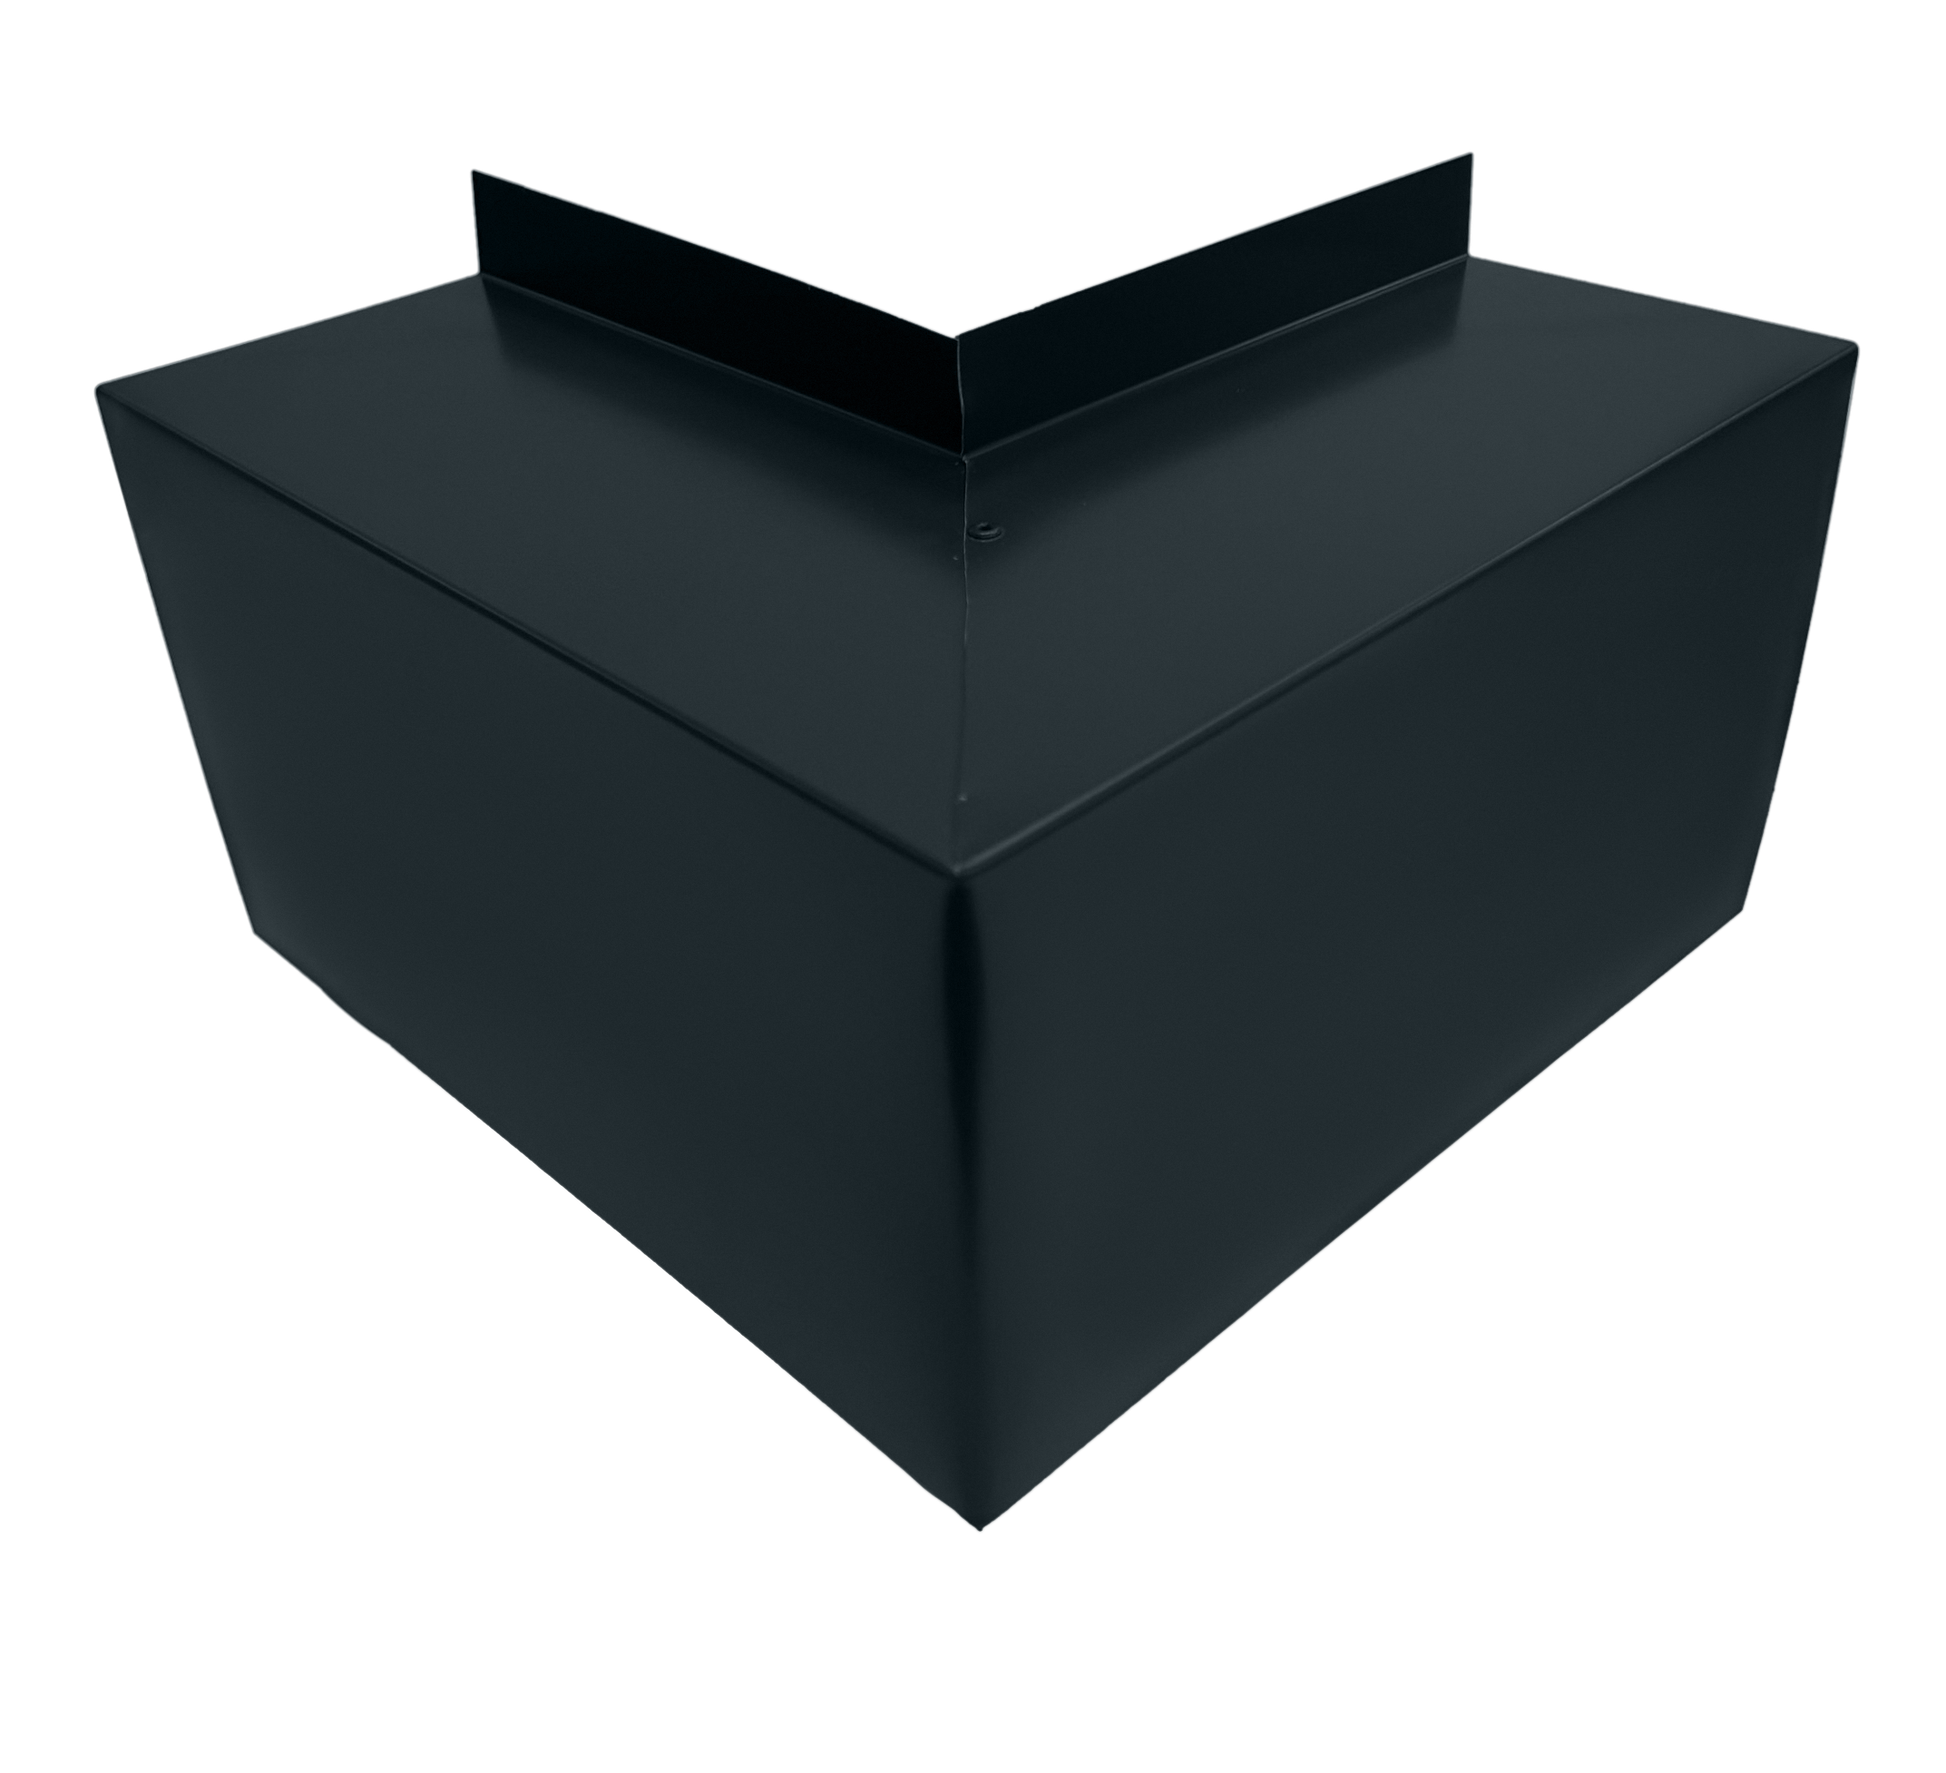 A close-up of a black metal object with a geometric V-shaped design. It has sharp edges and flat surfaces, resembling part of an industrial structure or Perma Cover Commercial Series - 24 Gauge Line Set Cover Outside Corner Elbows - Premium Quality. The background is plain and unobtrusive, emphasizing the object's shape and material for easy installation.